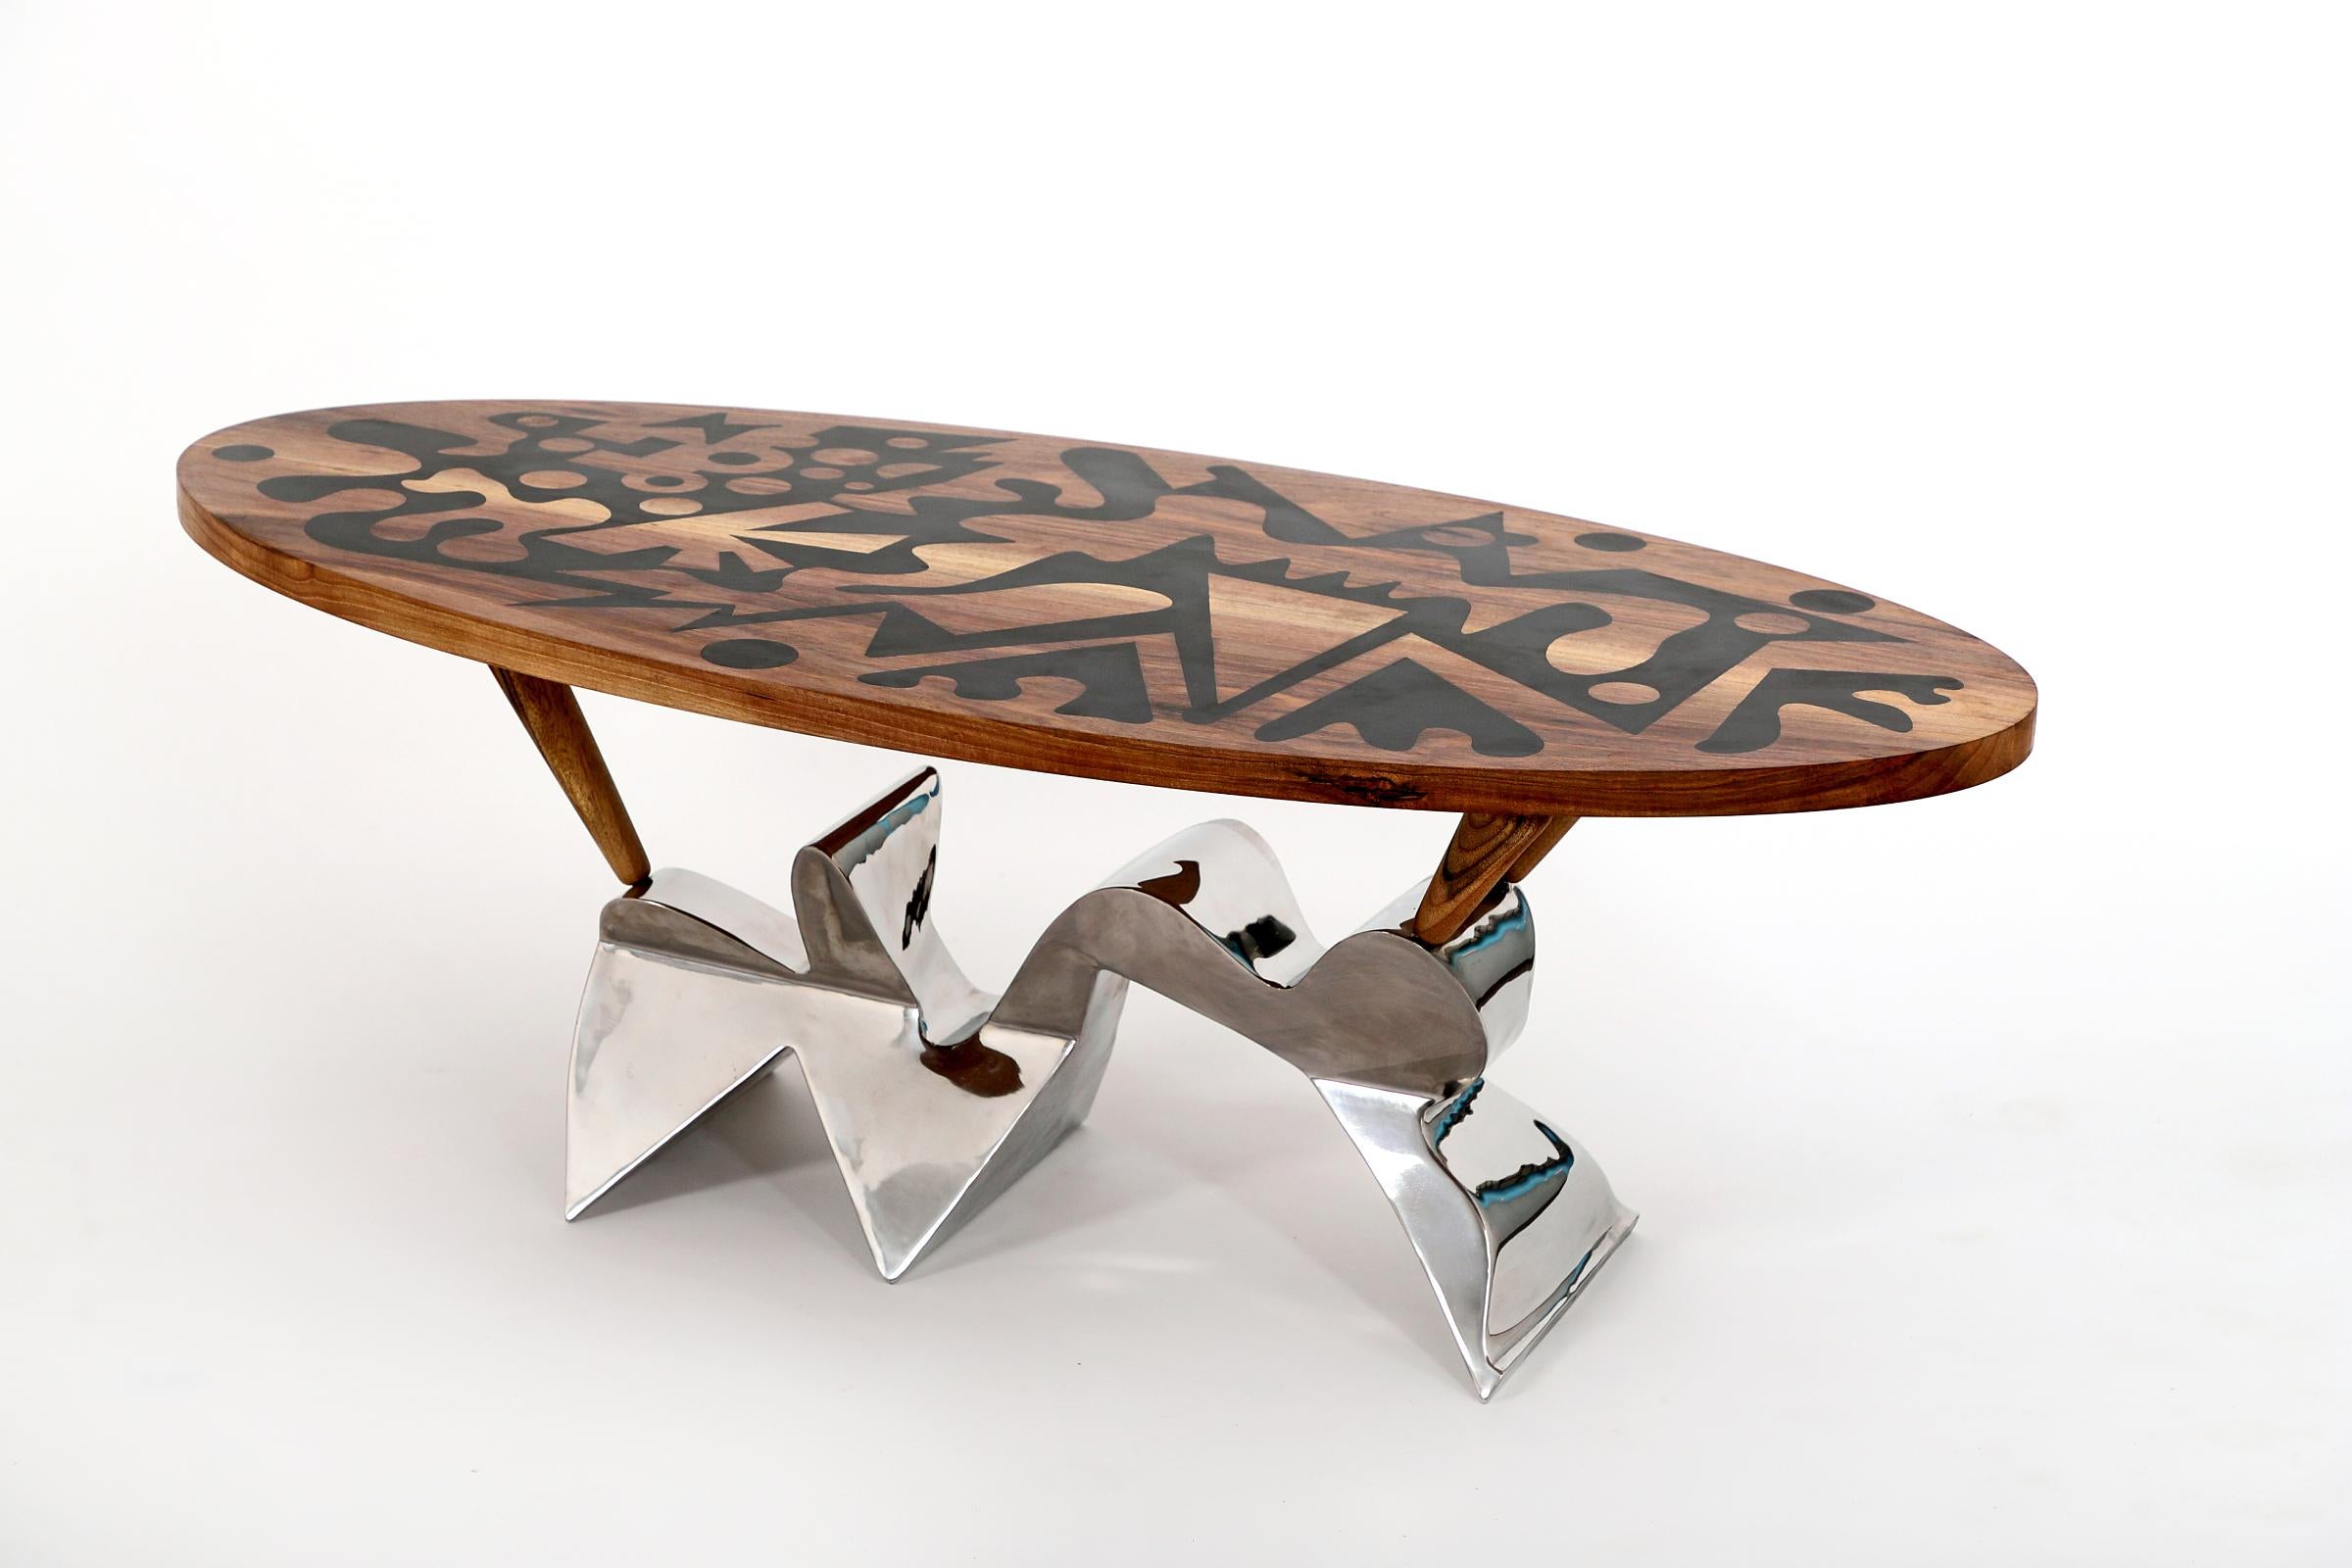 The table top made of walnut wood has hand-carved ornaments that are filled with epoxy resin.
The stainless steel leg was hand welded and then hand polished.
The main idea was to use the epoxy resin casting system in an interesting way.
 